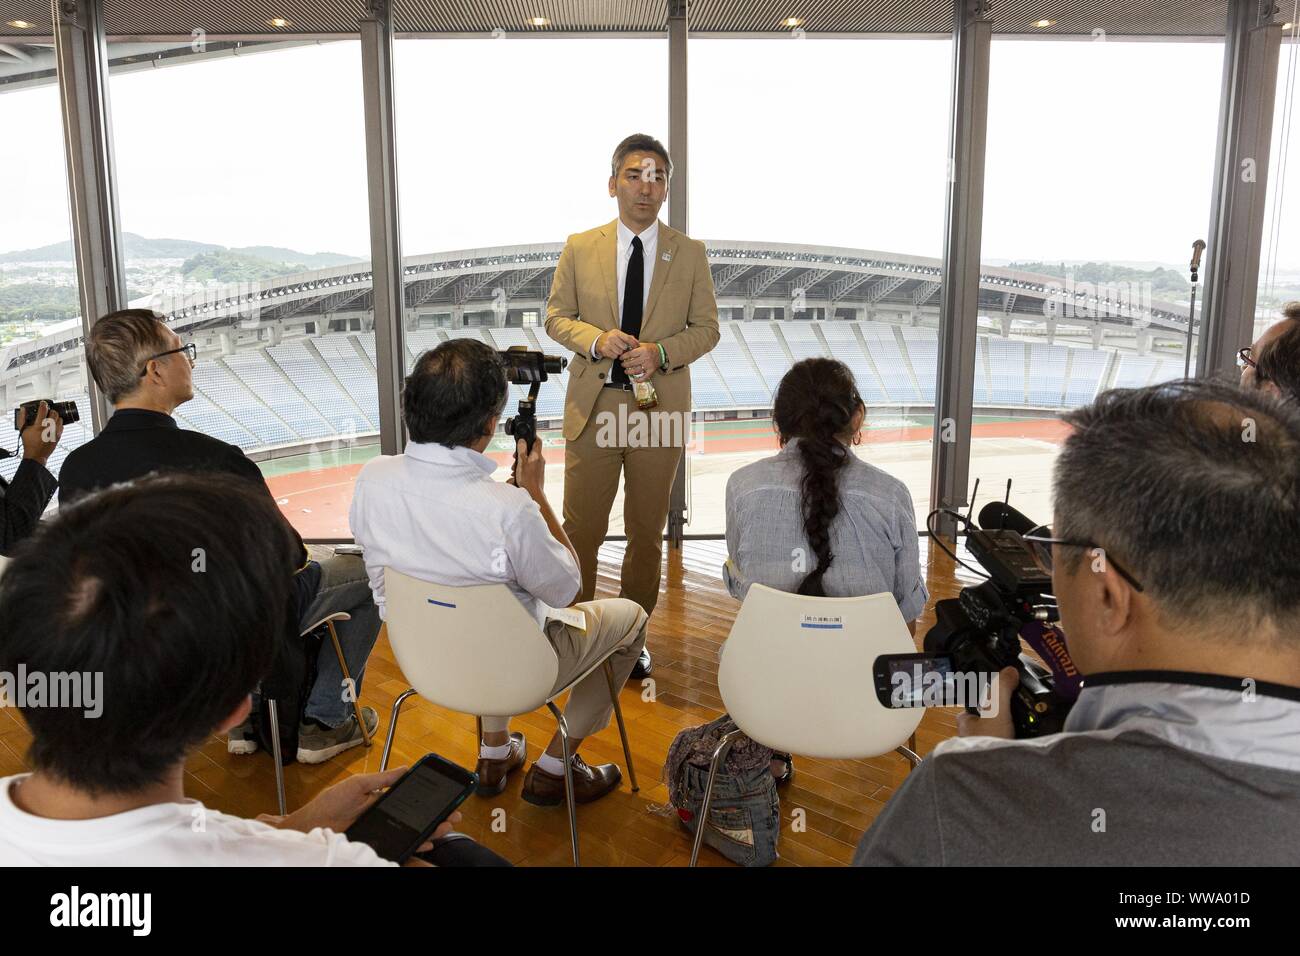 Miyagi, Japan. 14th Sep, 2019. Yutaka Kumagai, Rifu Town Mayor speaks with a group of foreign journalists at Miyagi Stadium. The stadium located in the town of Rifu was damaged by the 2011 Great East Japan Earthquake. A media tour organized by the Tokyo Metropolitan Government in collaboration with local authorities aims to showcase the recovery efforts in Tohoku area affected by the 2011 Great East Japan Earthquake and Tsunami. The stadium is the biggest stadium in the Tohoku area with a capacity of 49,000 people and will host the Tokyo 2020 football games. (Credit Image: © Rodrigo Reyes Stock Photo